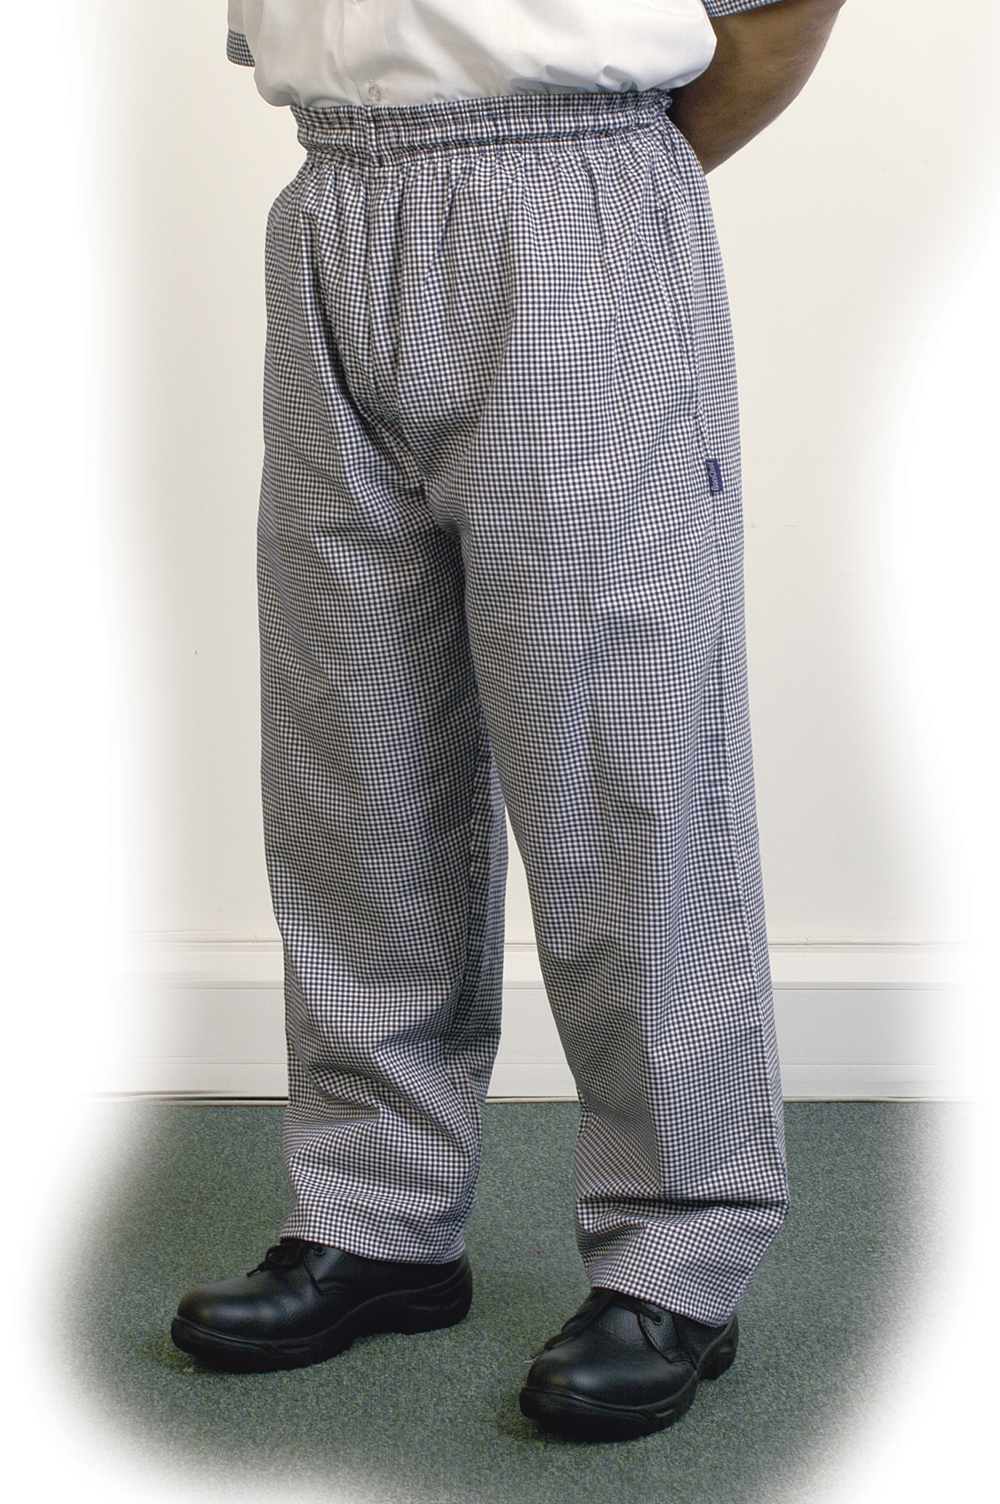 Best Chefs Trousers  Pants Black or Checkered Chef Trousers  PPG